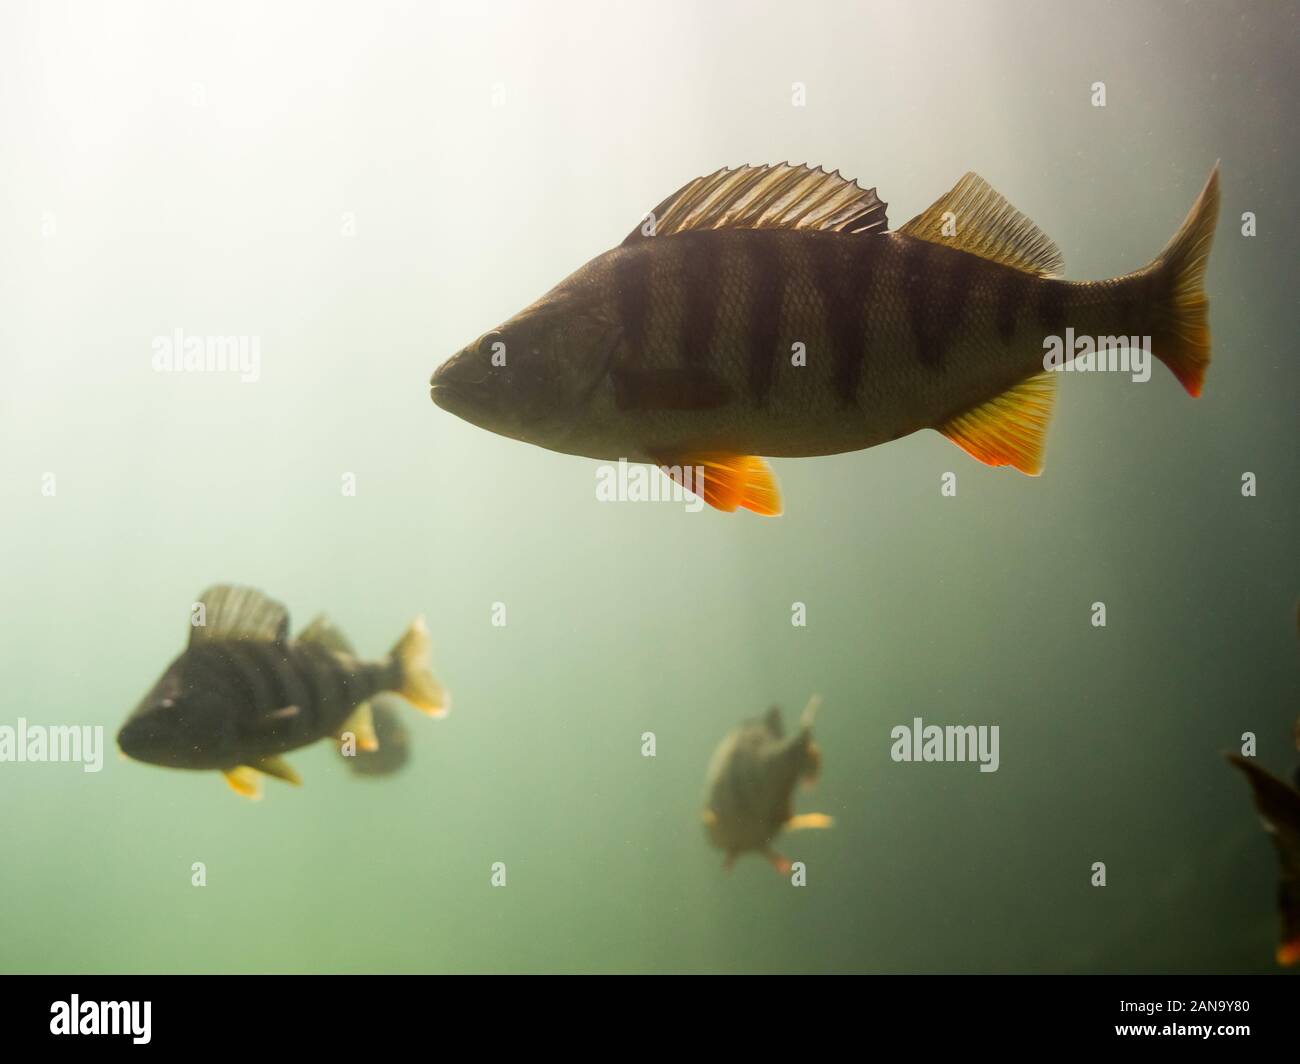 Big perch swimming with backlight Stock Photo